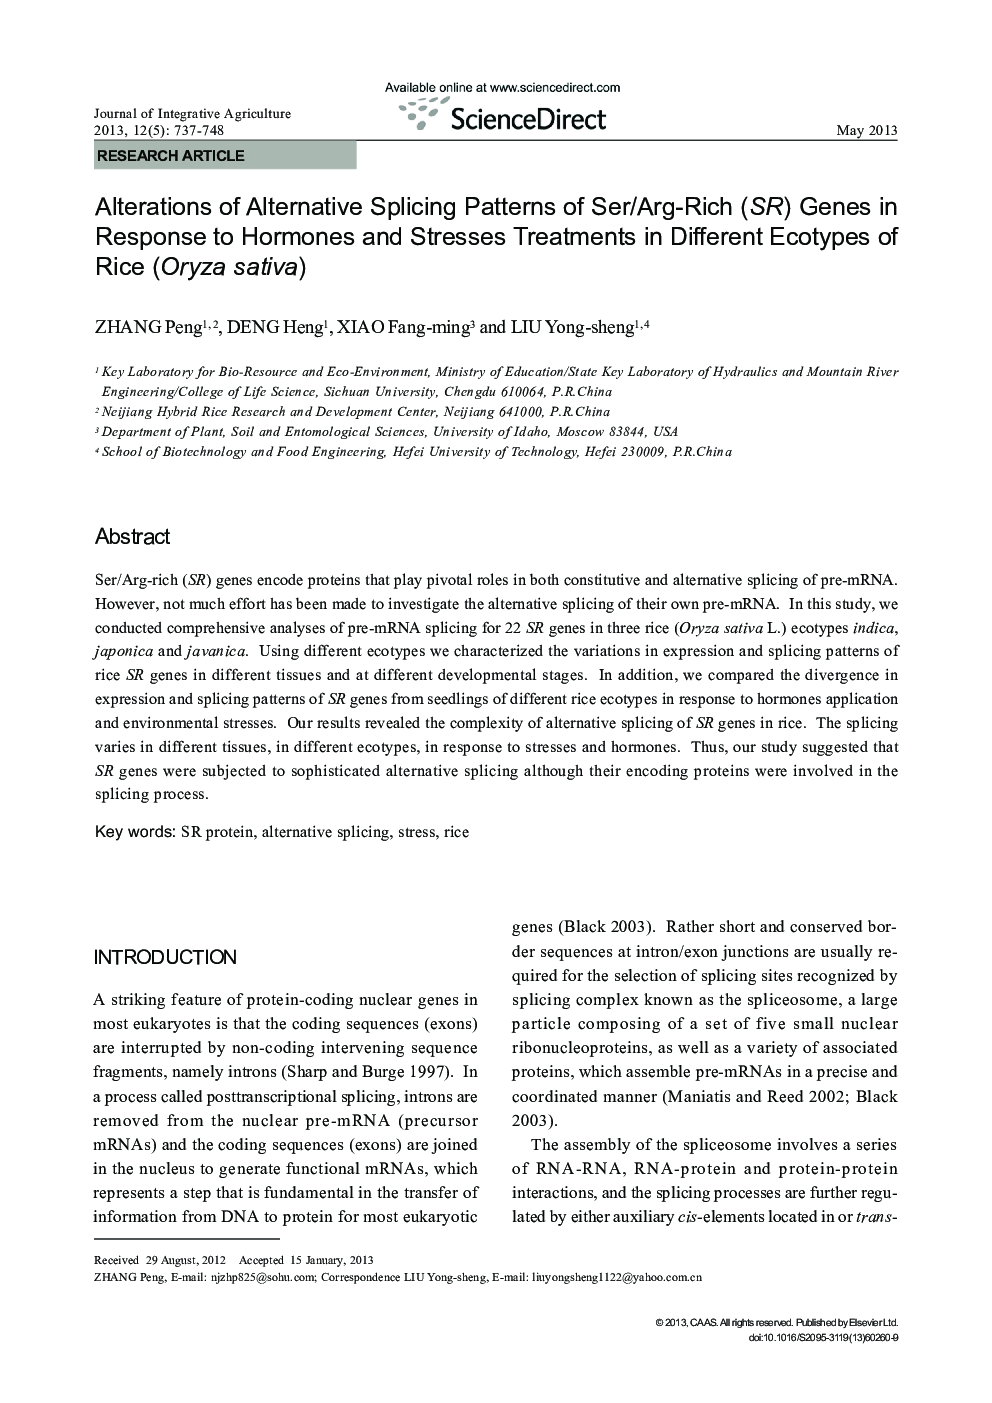 Alterations of Alternative Splicing Patterns of Ser/Arg-Rich (SR) Genes in Response to Hormones and Stresses Treatments in Different Ecotypes of Rice (Oryza sativa)